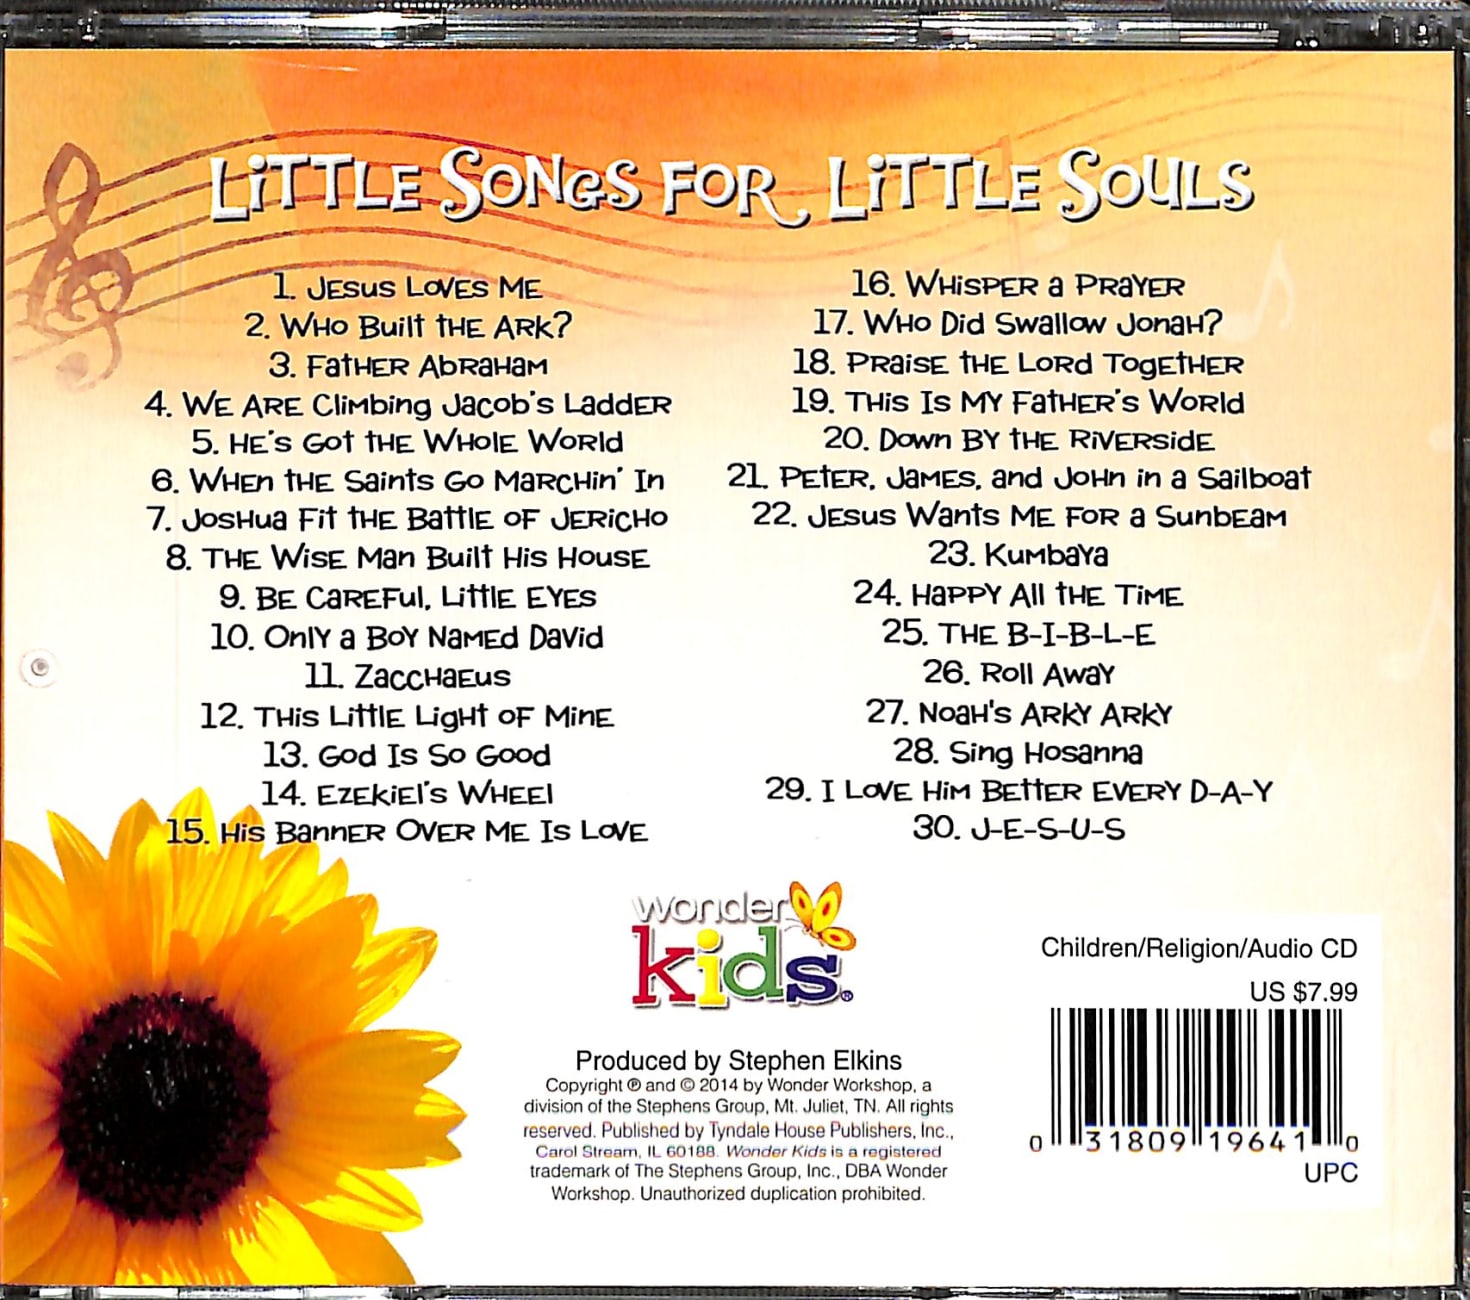 Little Songs For Little Souls (#01 in Wonder Kids Music Series) Compact Disk